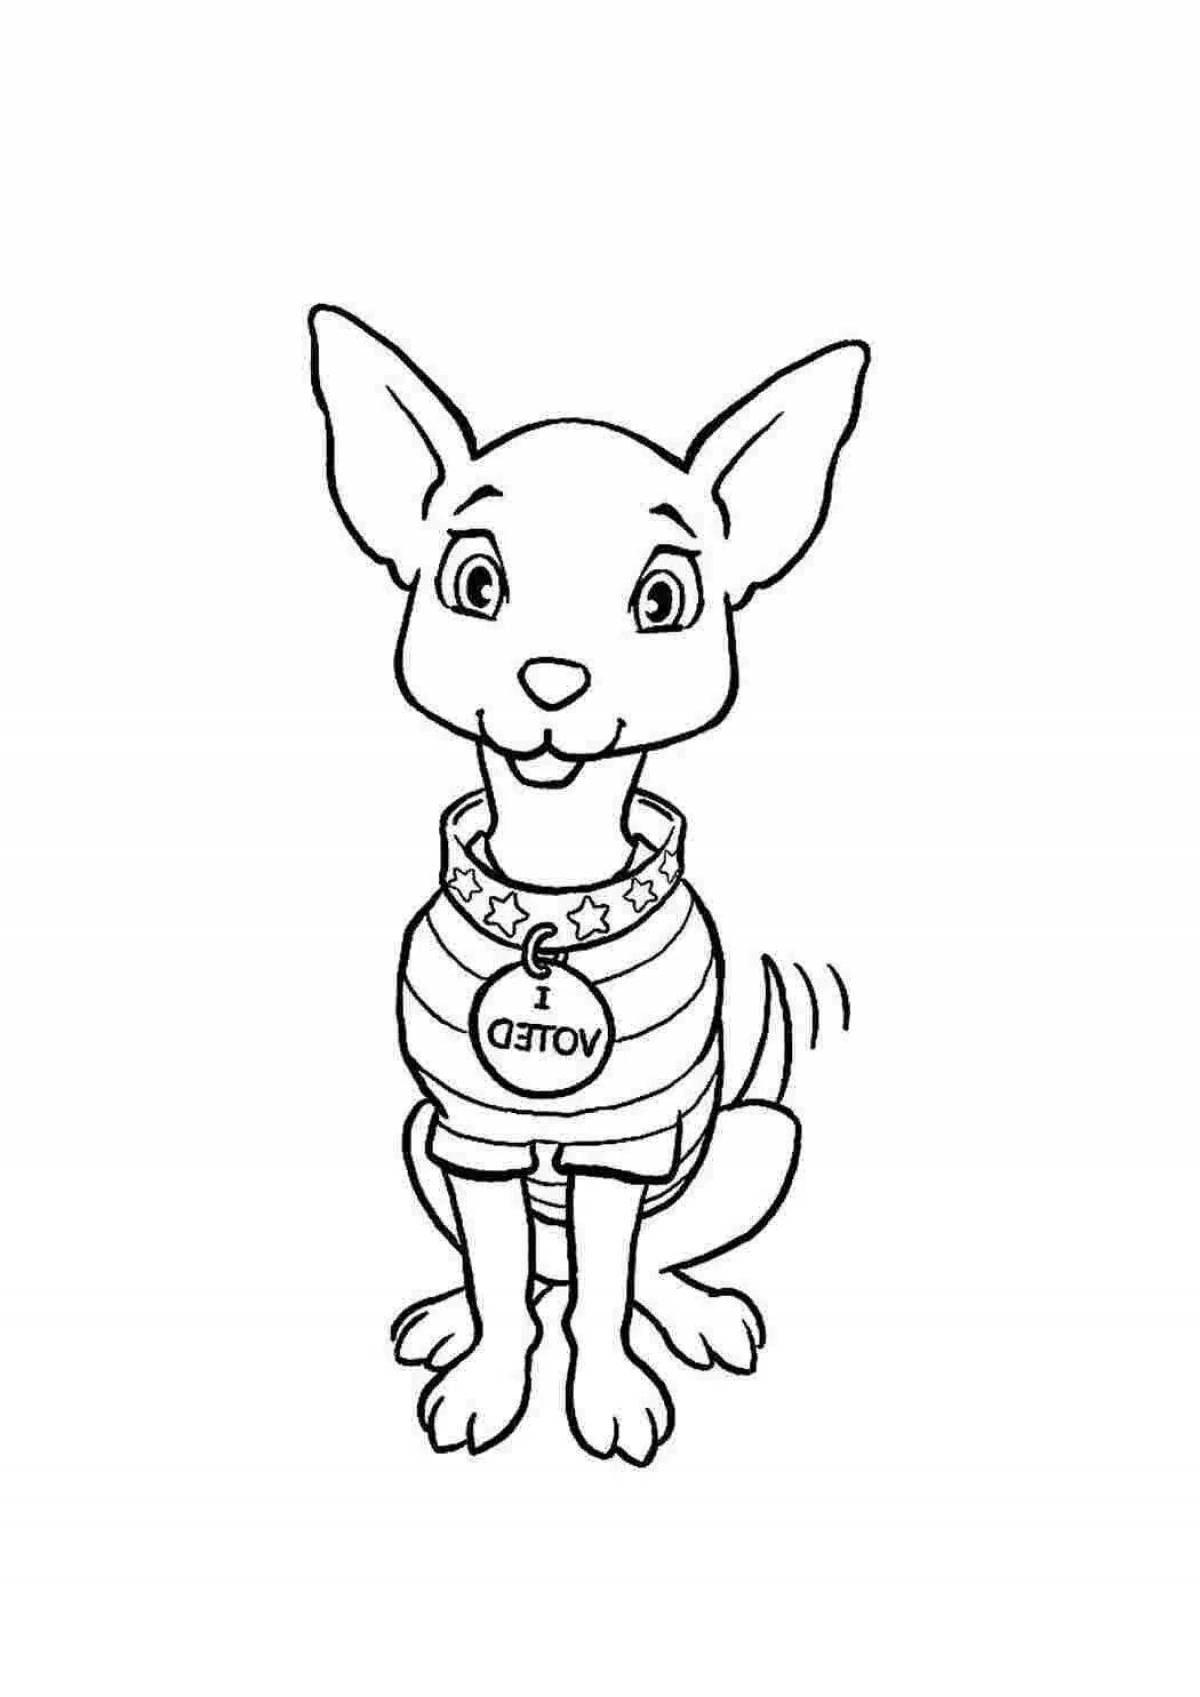 Chihuahua fun coloring book for kids